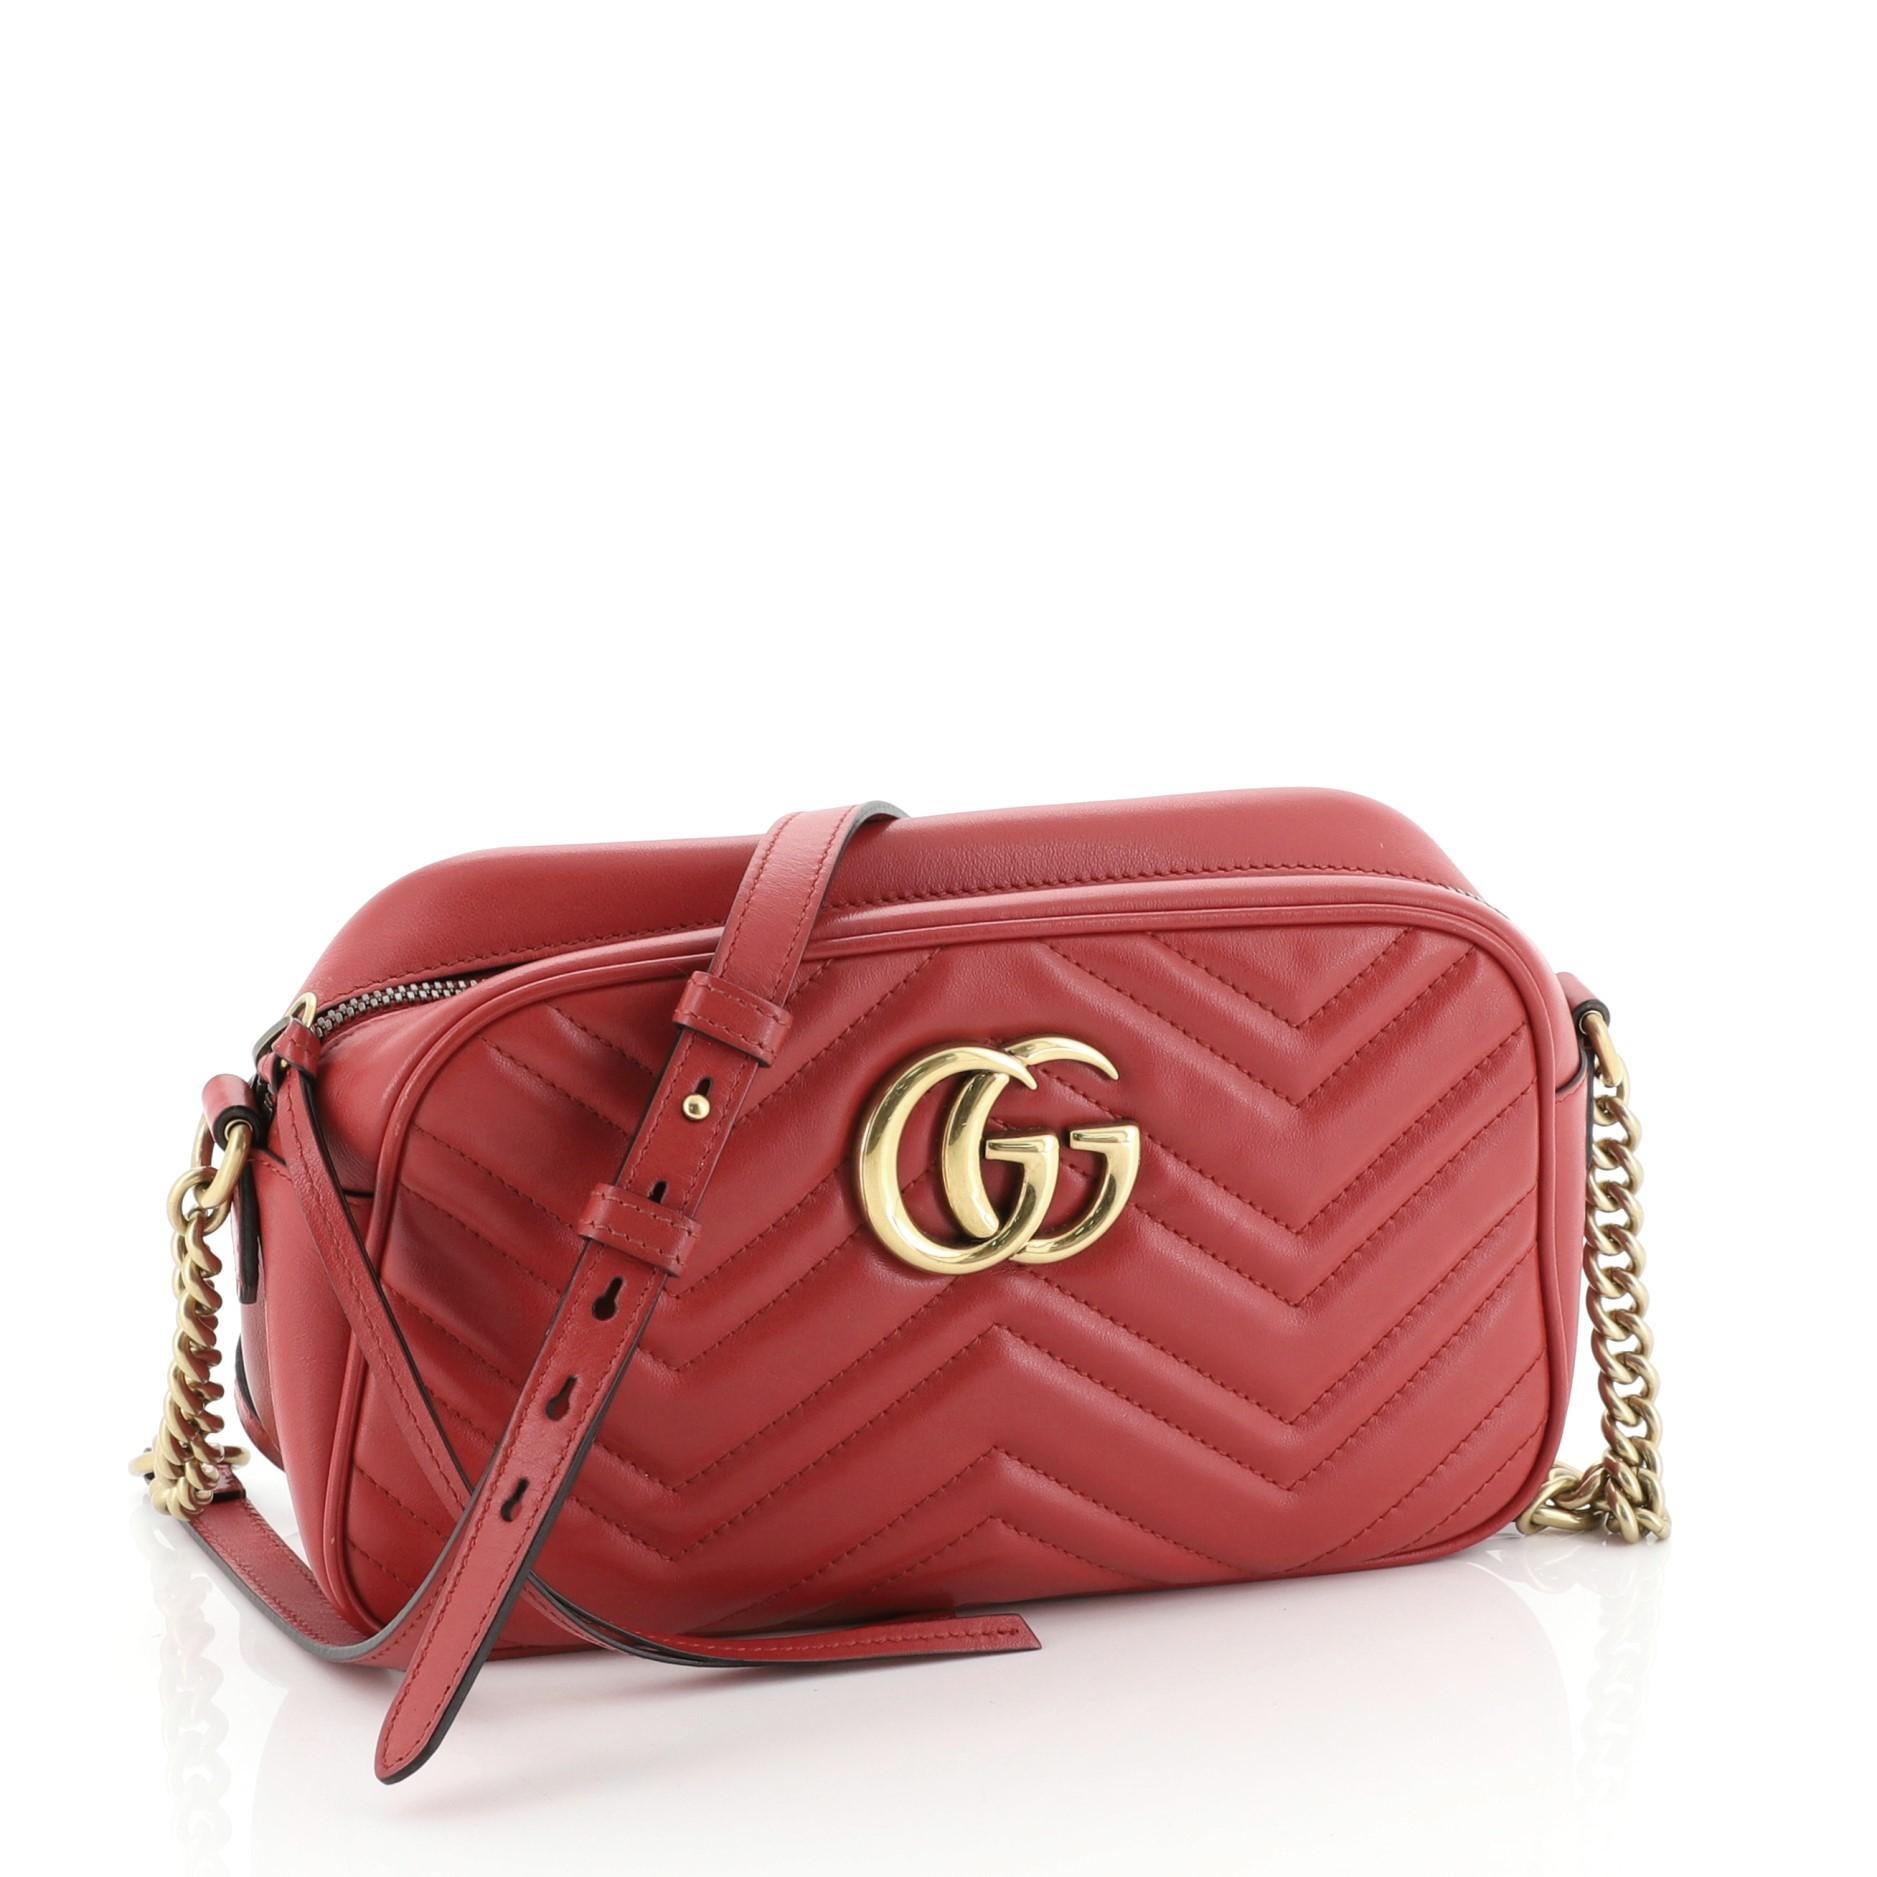 This Gucci GG Marmont Shoulder Bag Matelasse Leather Small, crafted from red matelasse leather, features a leather strap with chain links, GG logo at the front, and aged gold-tone hardware. Its zip closure opens to a neutral microfiber interior with